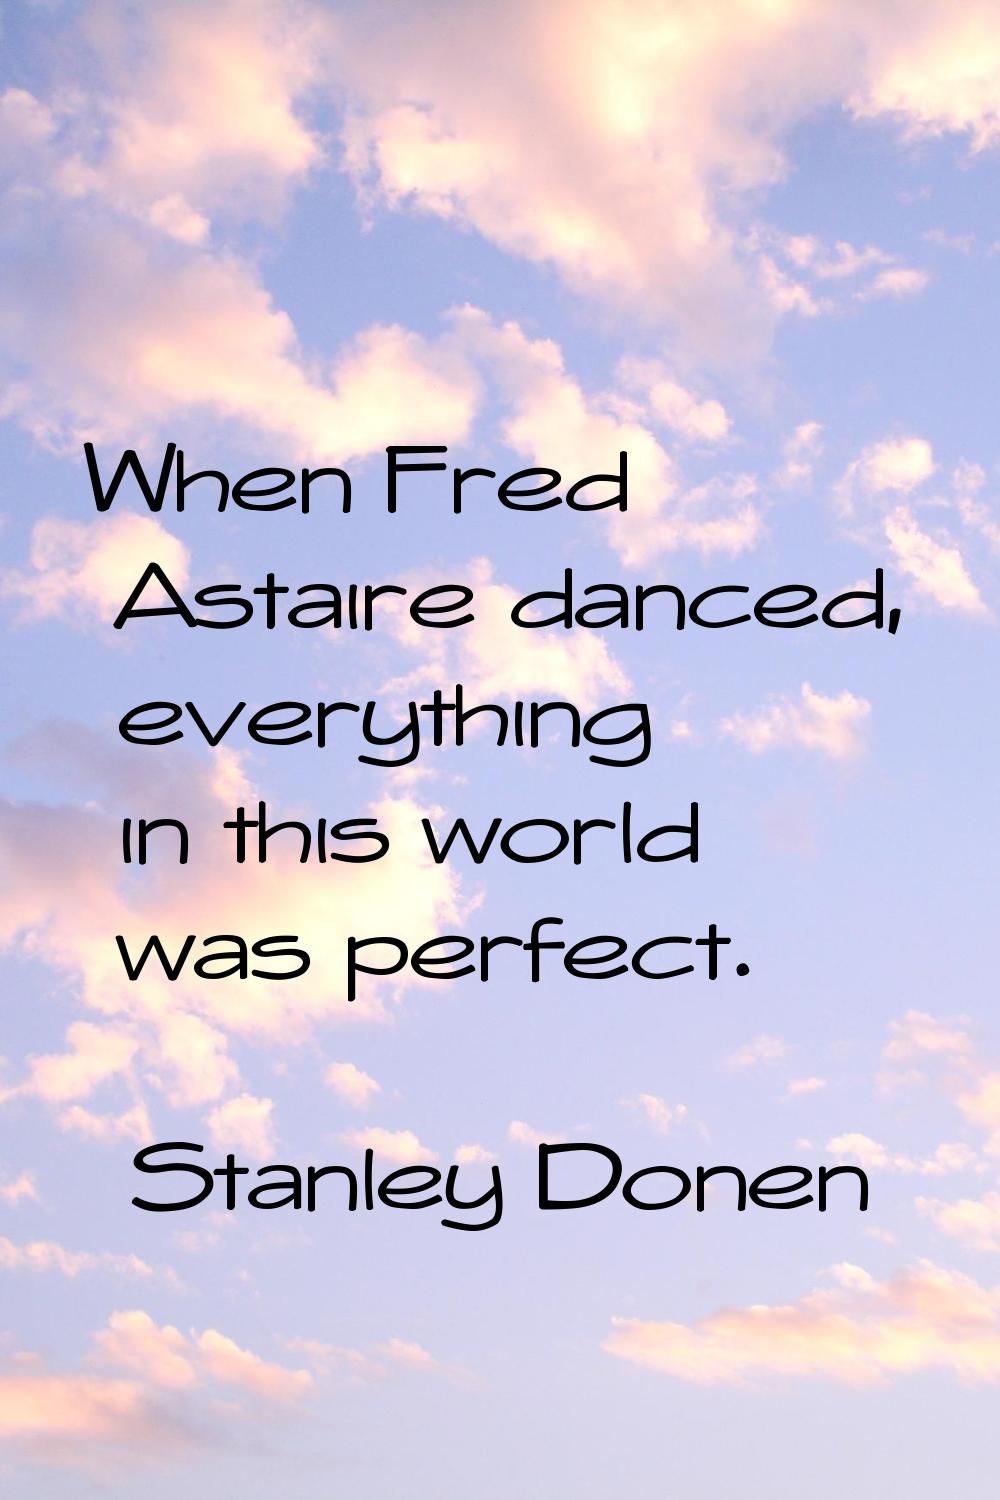 When Fred Astaire danced, everything in this world was perfect.